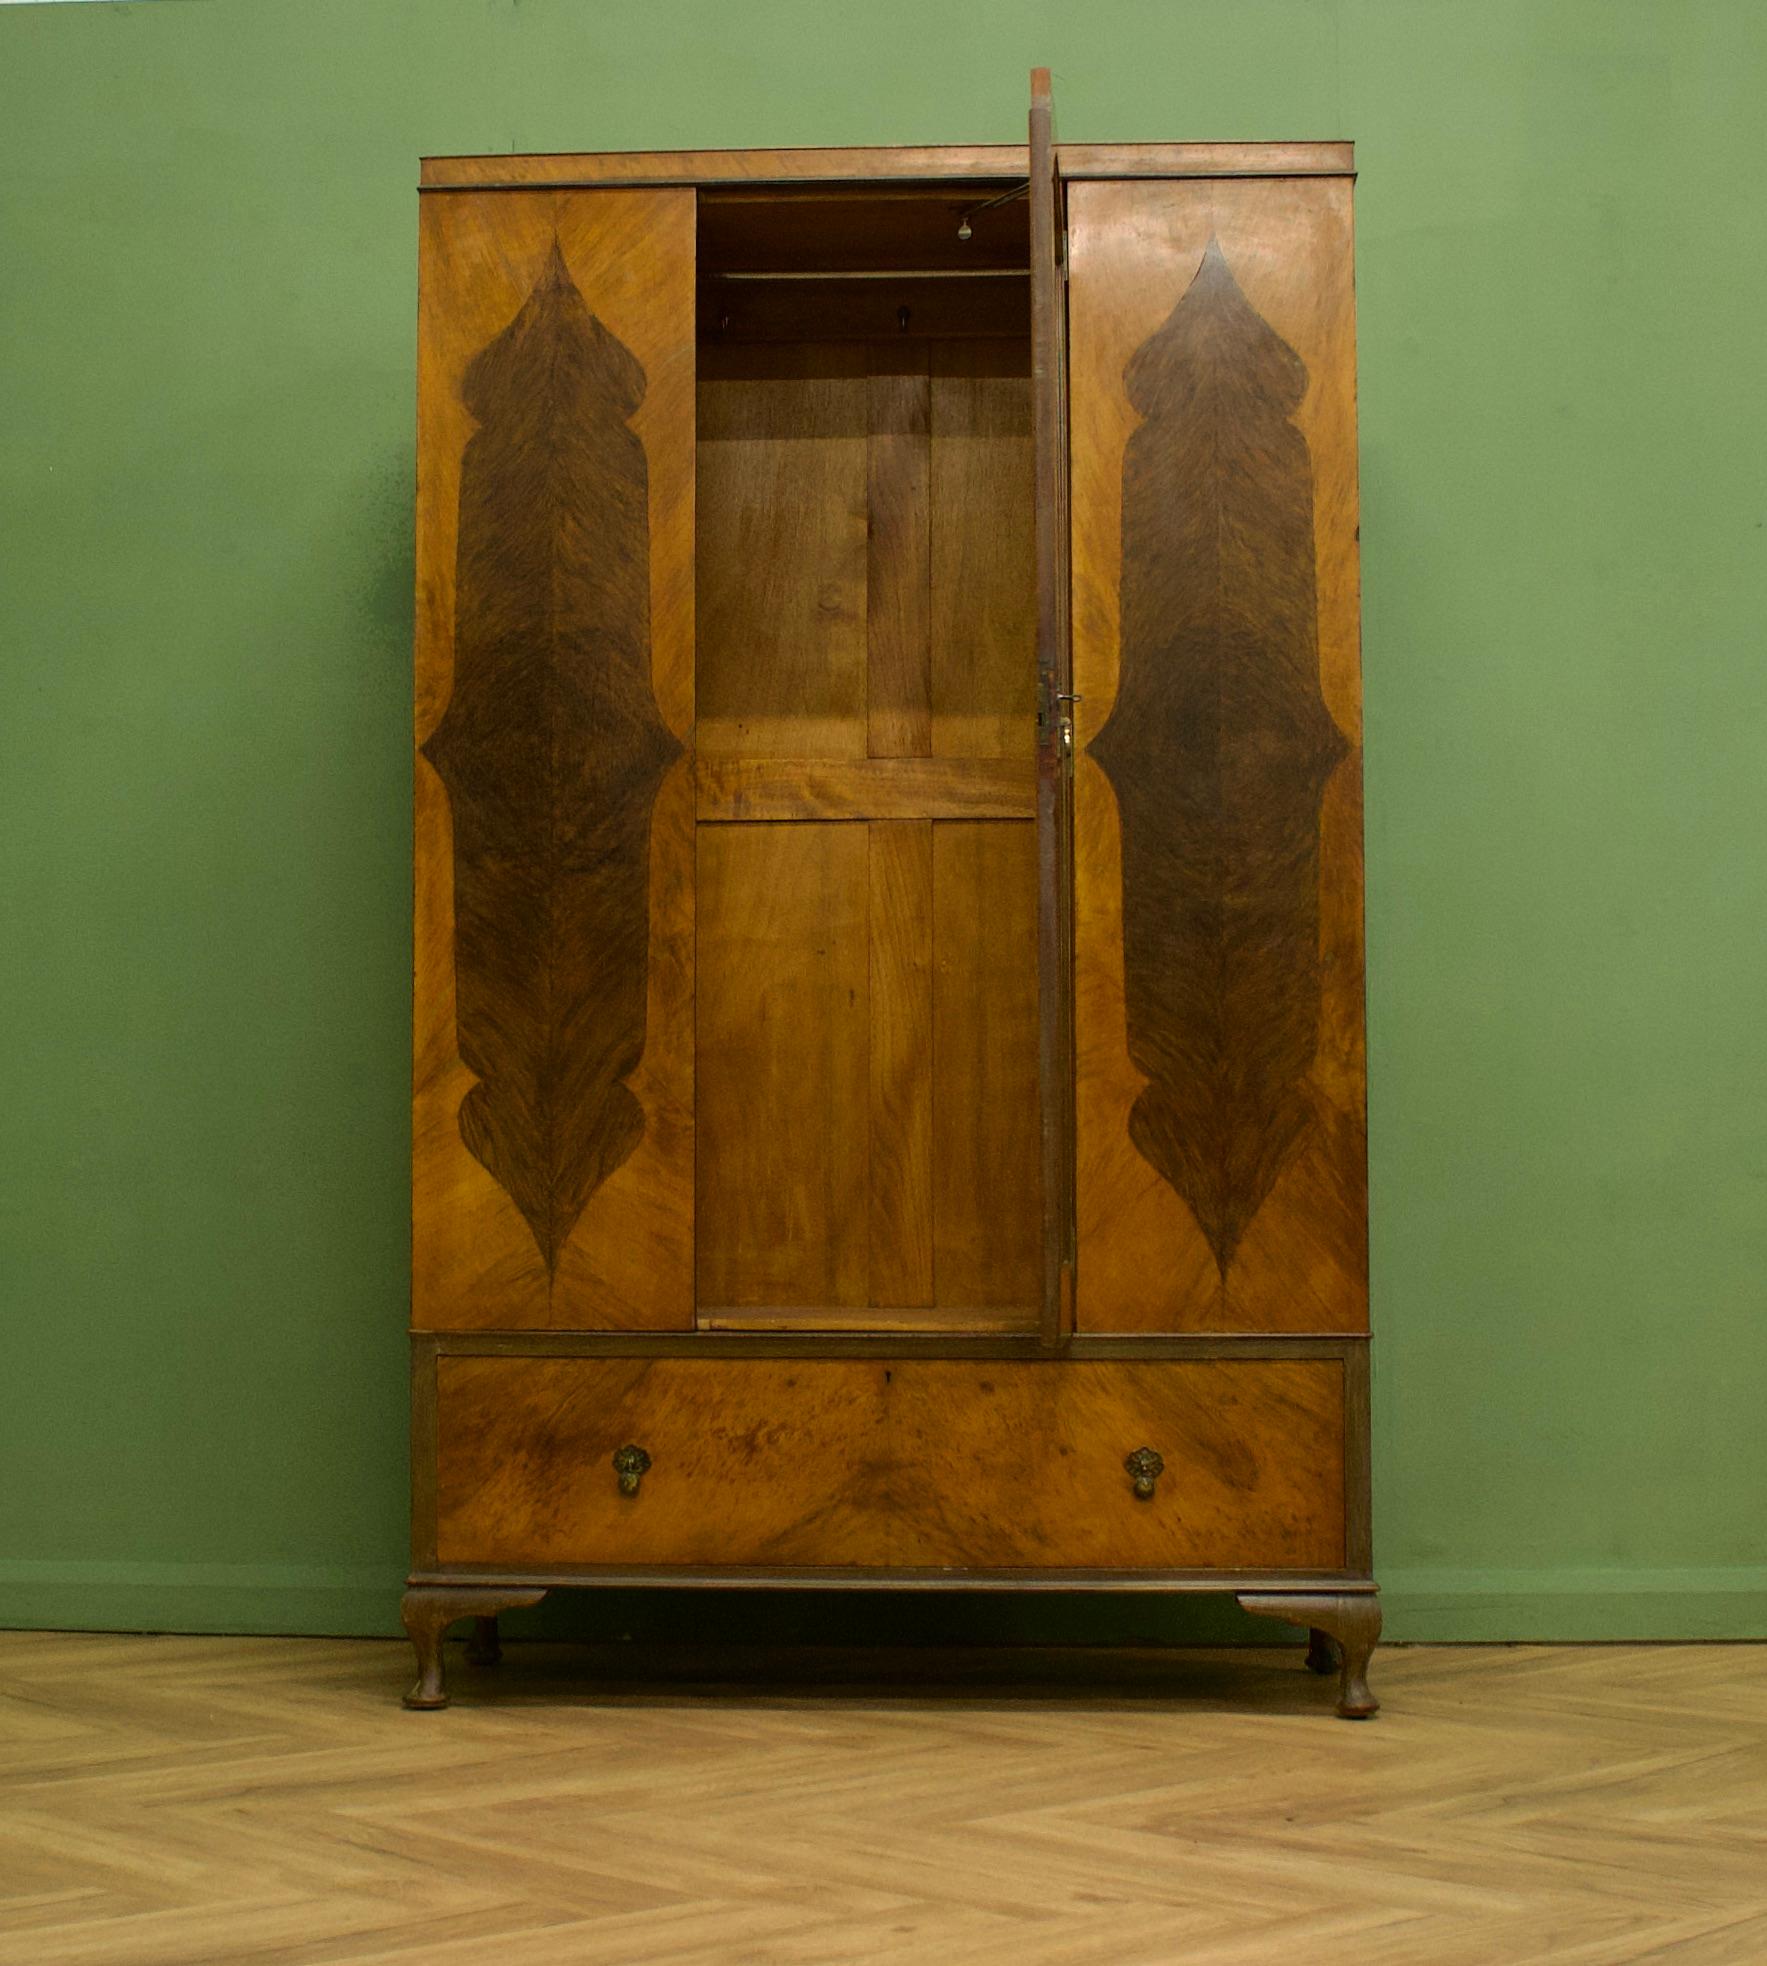 Early 20th Century British Art Deco Burr Walnut Wardrobe from Jas Shoolbred, 1930s For Sale